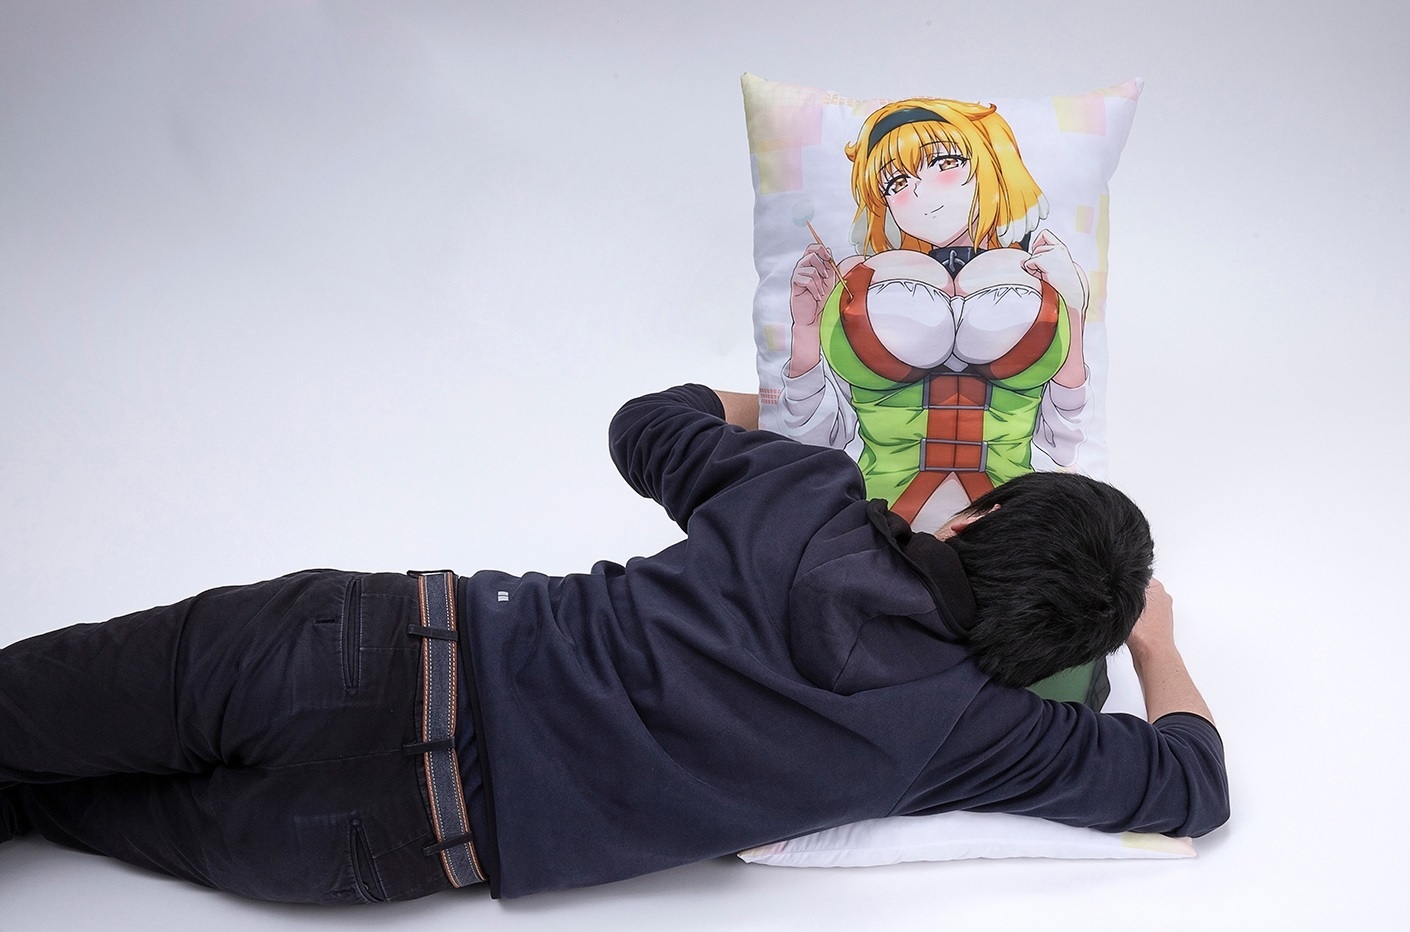 Buy Jujutsu Kaisen Satoru Gojo Anime Pillowcase Cover Uncensored Pillowcase  Protector 20x36inch Cushion Throw Pillow Cover Peach Skin Online at Low  Prices in India - Amazon.in